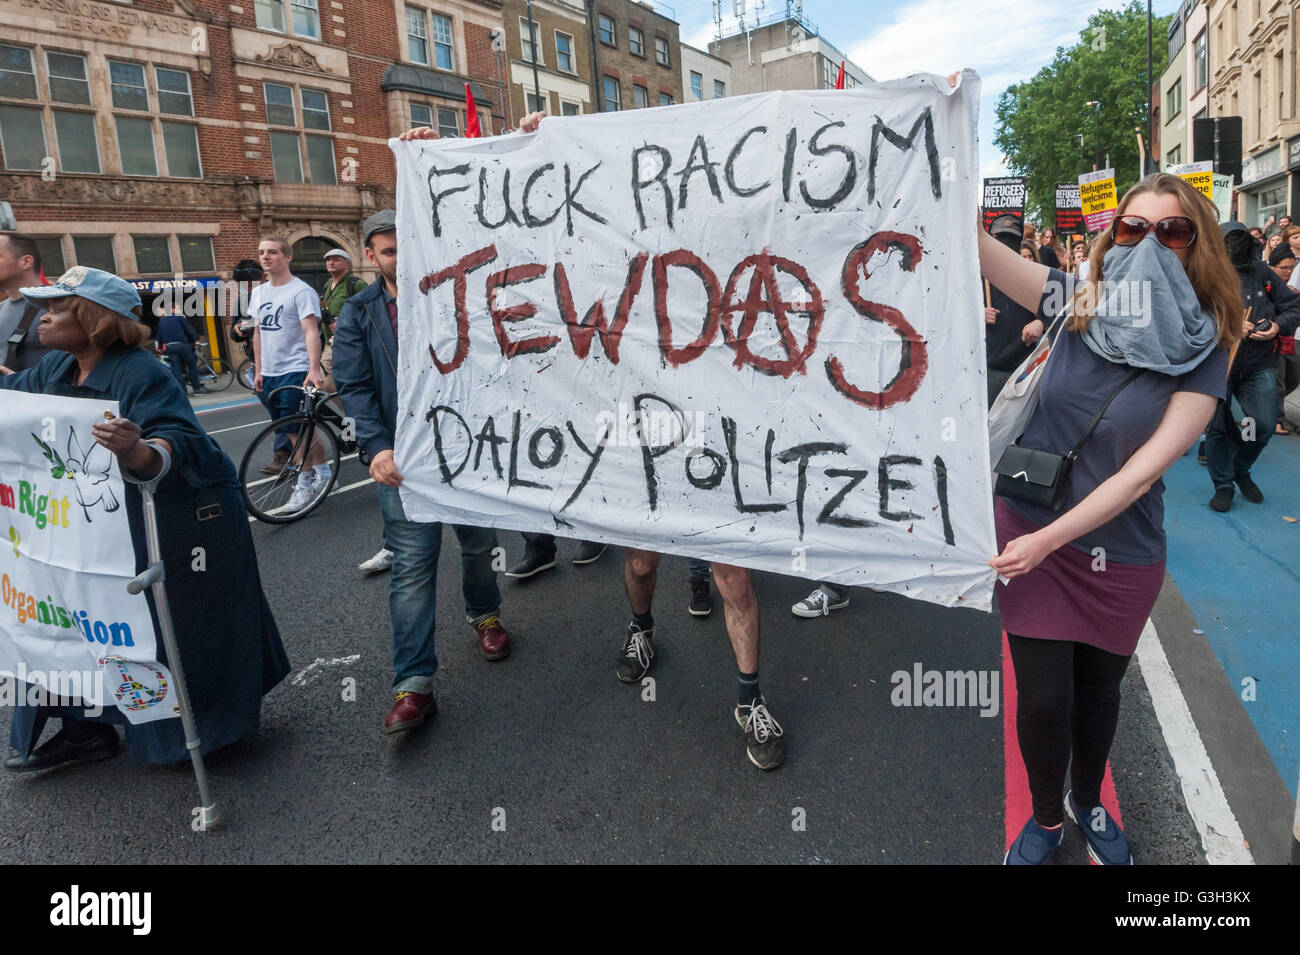 London, UK. June 24th 2016. After a rally in Altab Ali Park, well over a thousand protesters set off on a long march to the offices of News International on the day after the UK voted to leave the EU. They were protesting against racism, for migrant rights and against fascist violence and argue that migration and immigrants have been attacked and scapegoated not only by both Remain and Leave campaigns but by mainstream parties and media over more than 20 years, stoking up hatred by insisting immigrants are a 'problem'.  Among groups at the front of the march was  radical Jewish diaspora group  Stock Photo